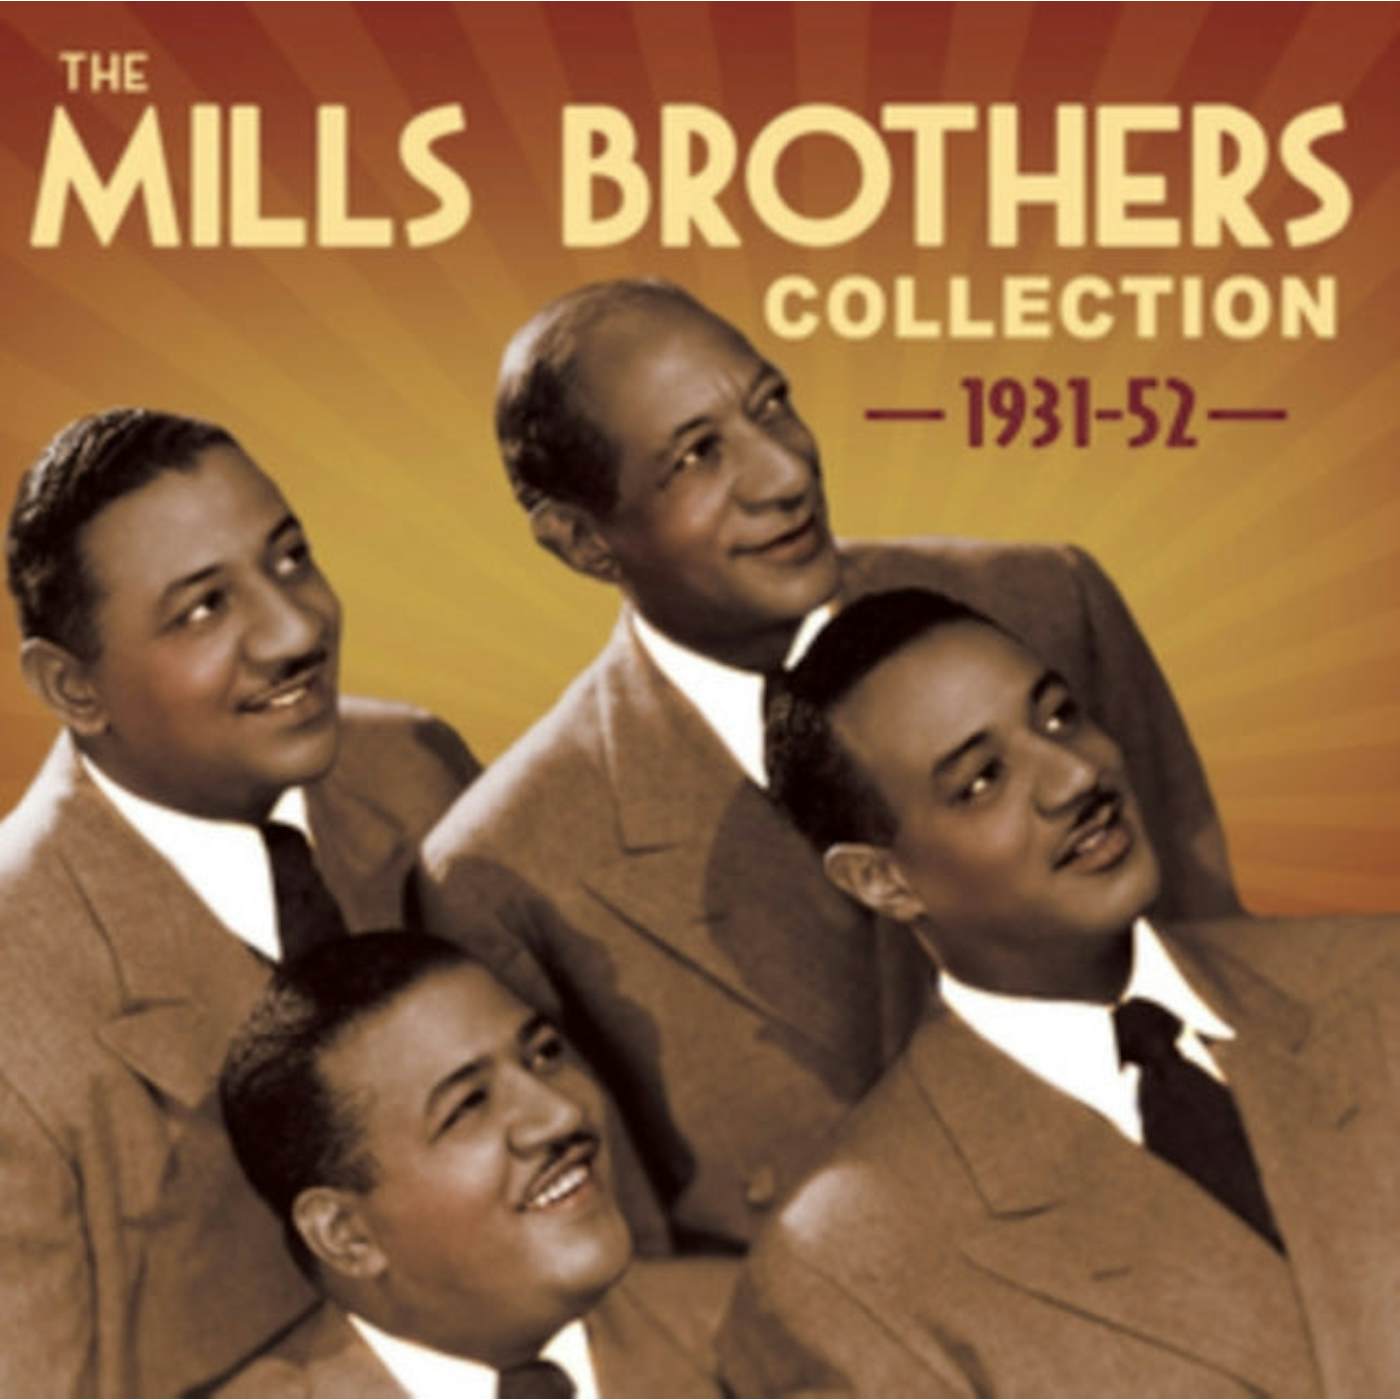 Mills Brothers CD - The Mills Brothers Collection 19 31-19 52